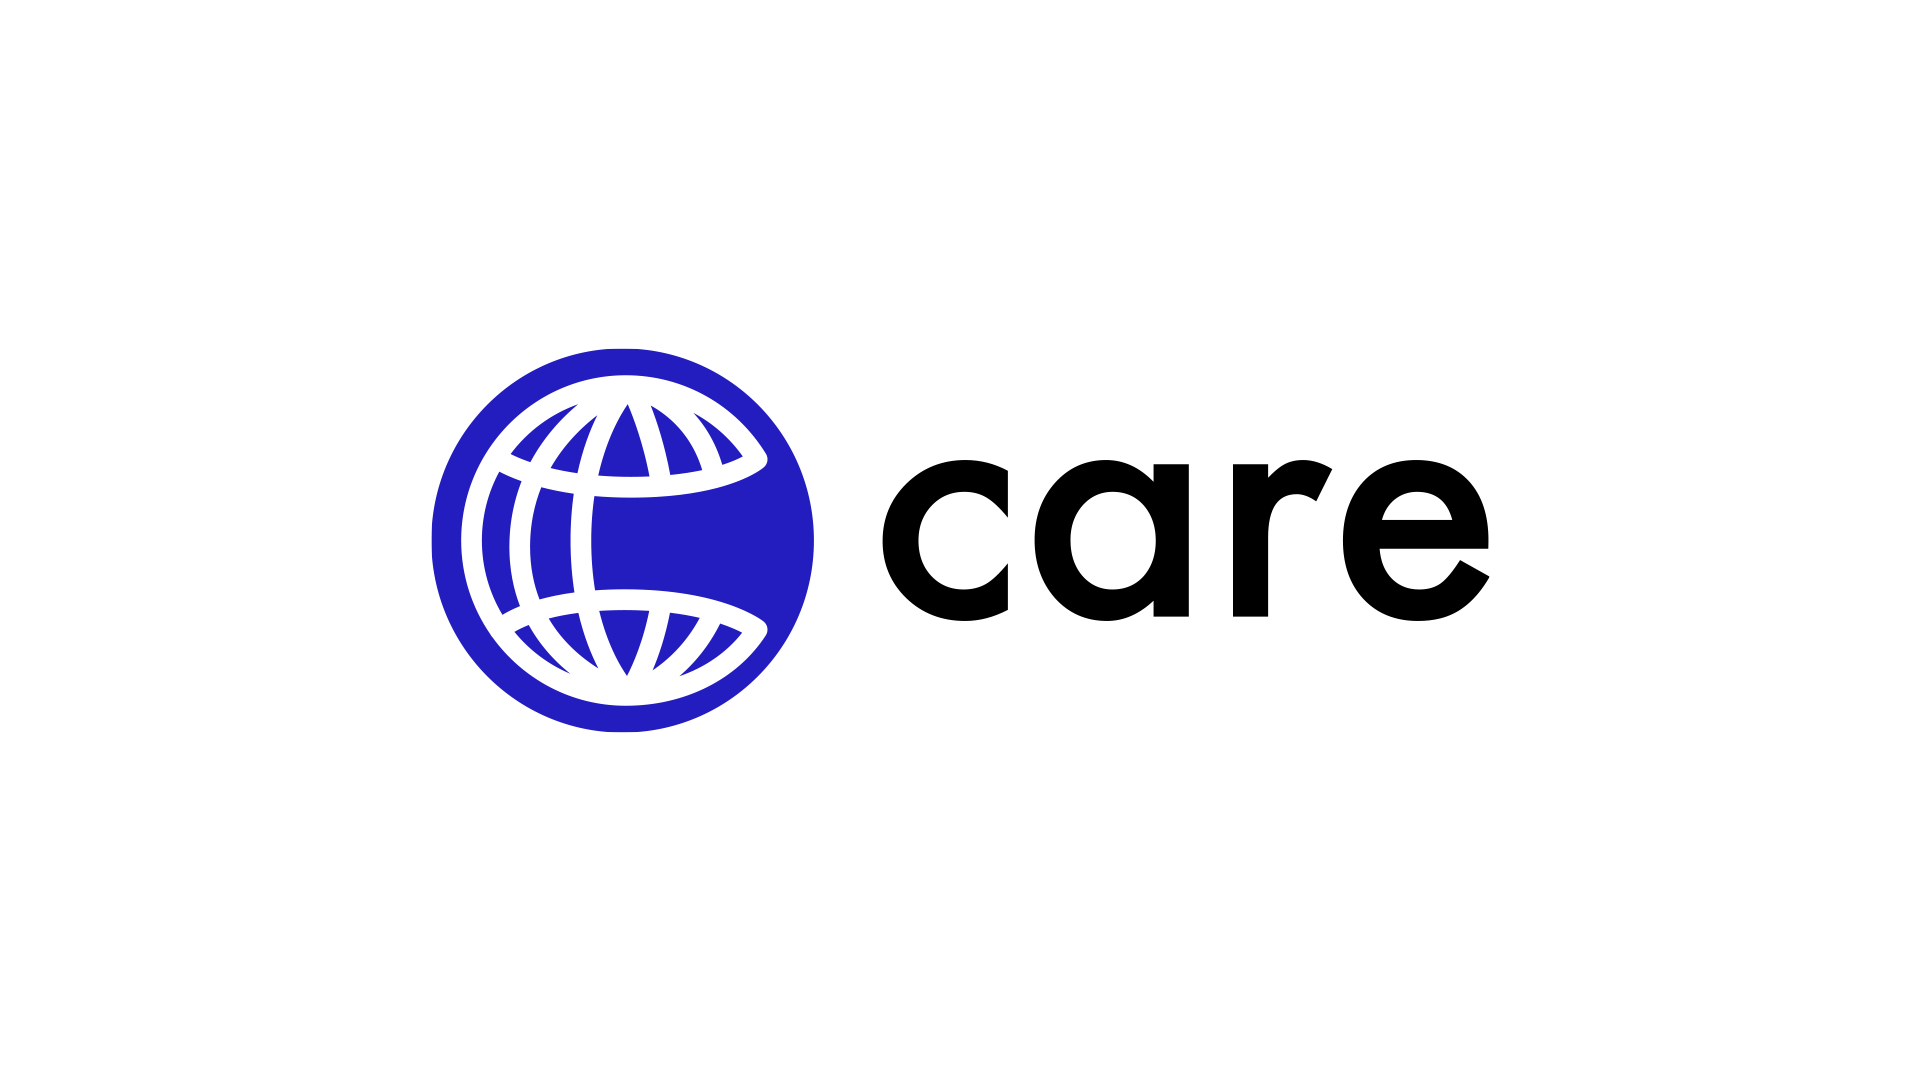 Care launches its new brand identity — Care